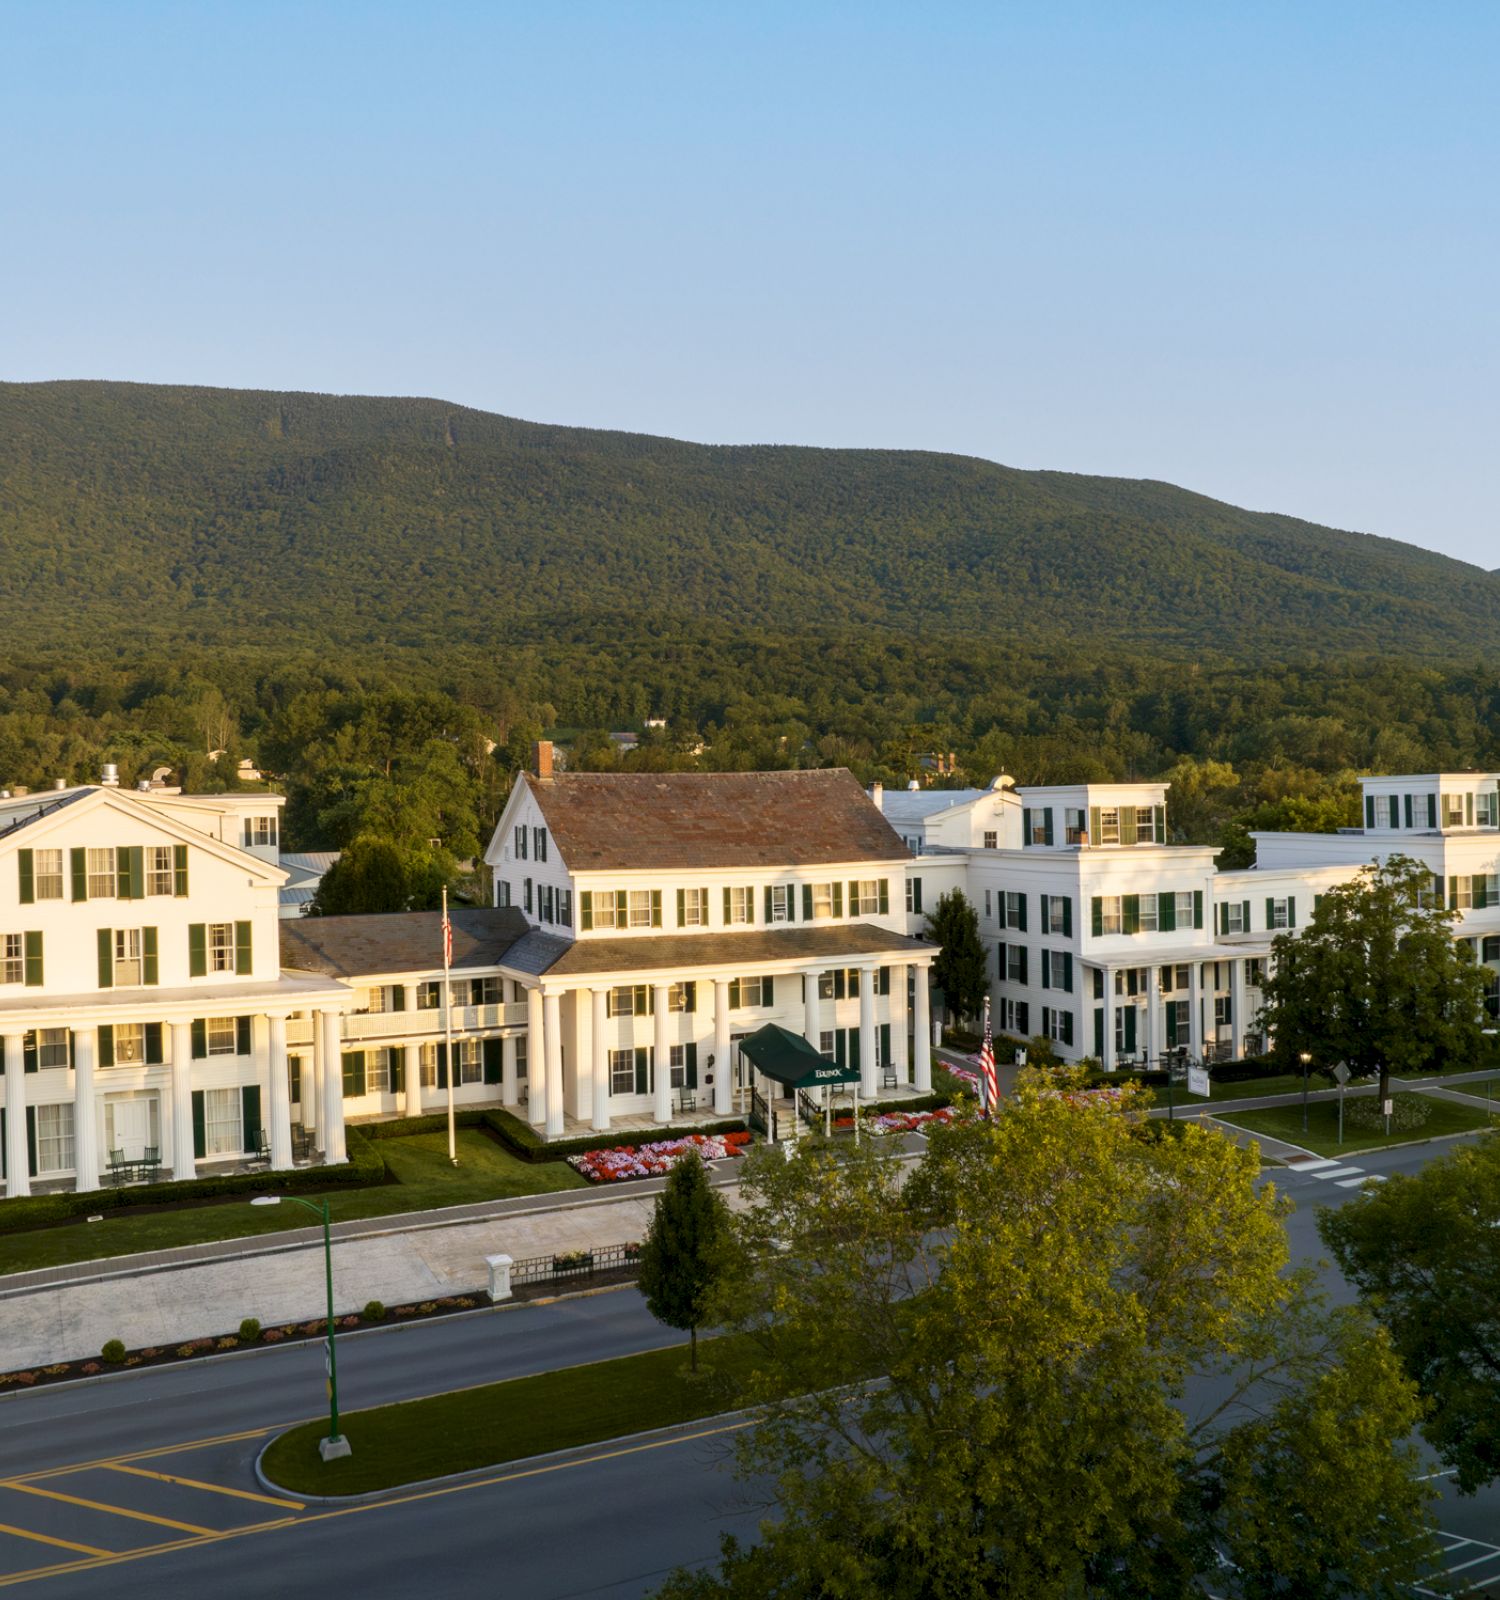 An expansive building with white facades set against a backdrop of a lush, green mountain and trees, intersected by a road in the foreground.